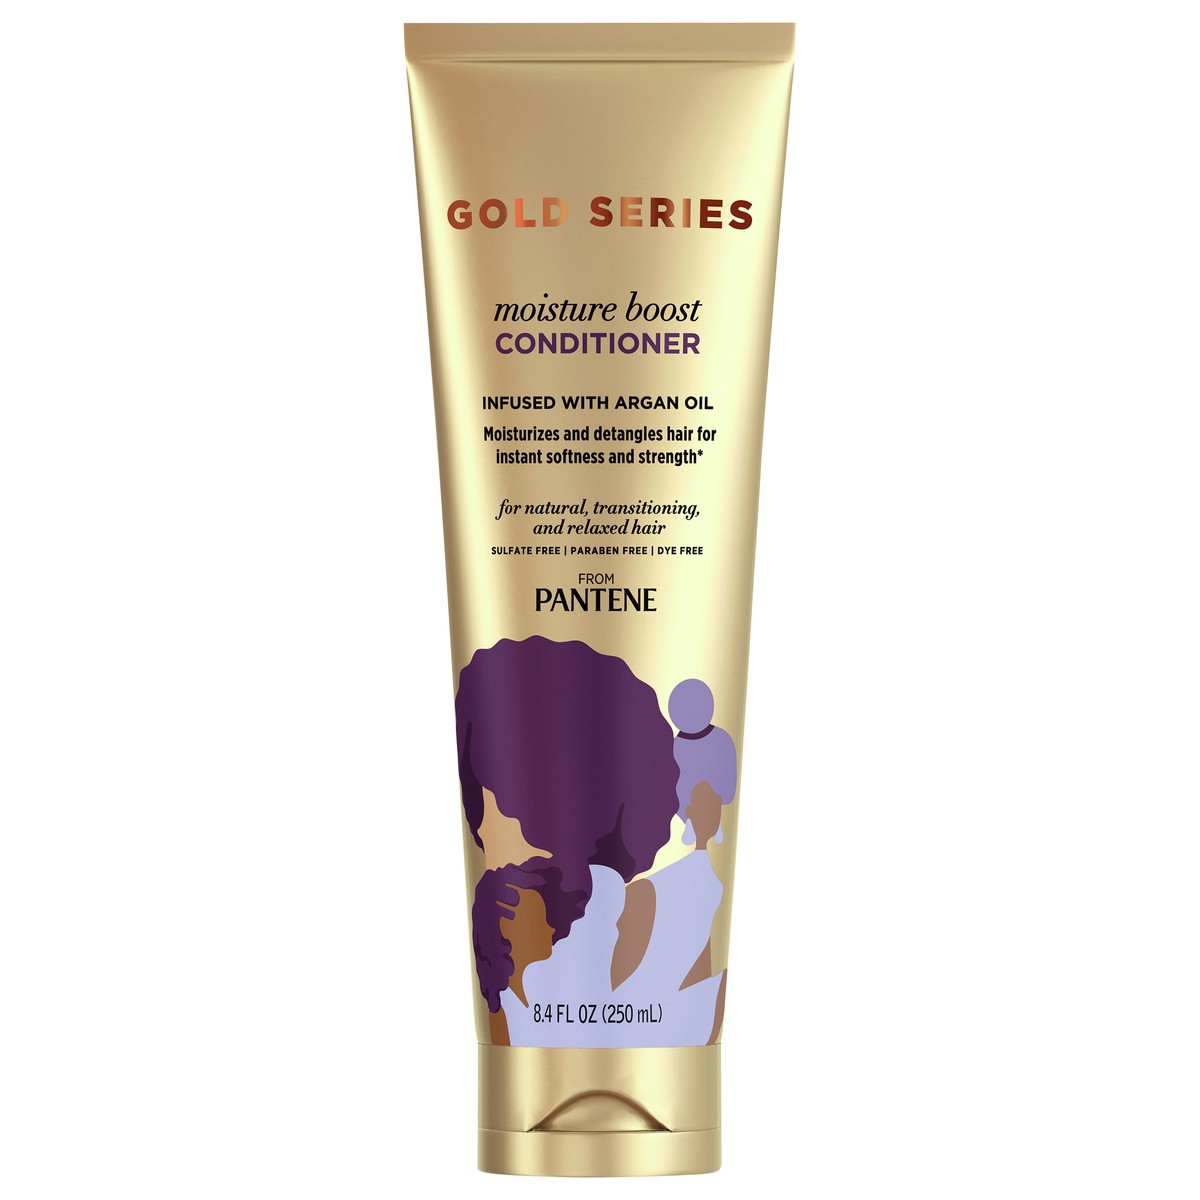 slide 1 of 3, Pantene Gold Series from Pantene Sulfate-Free Moisture Boost Conditioner Infused with Argan Oil for Curly, Coily Hair, 8.4 fl oz, 8.4 fl oz